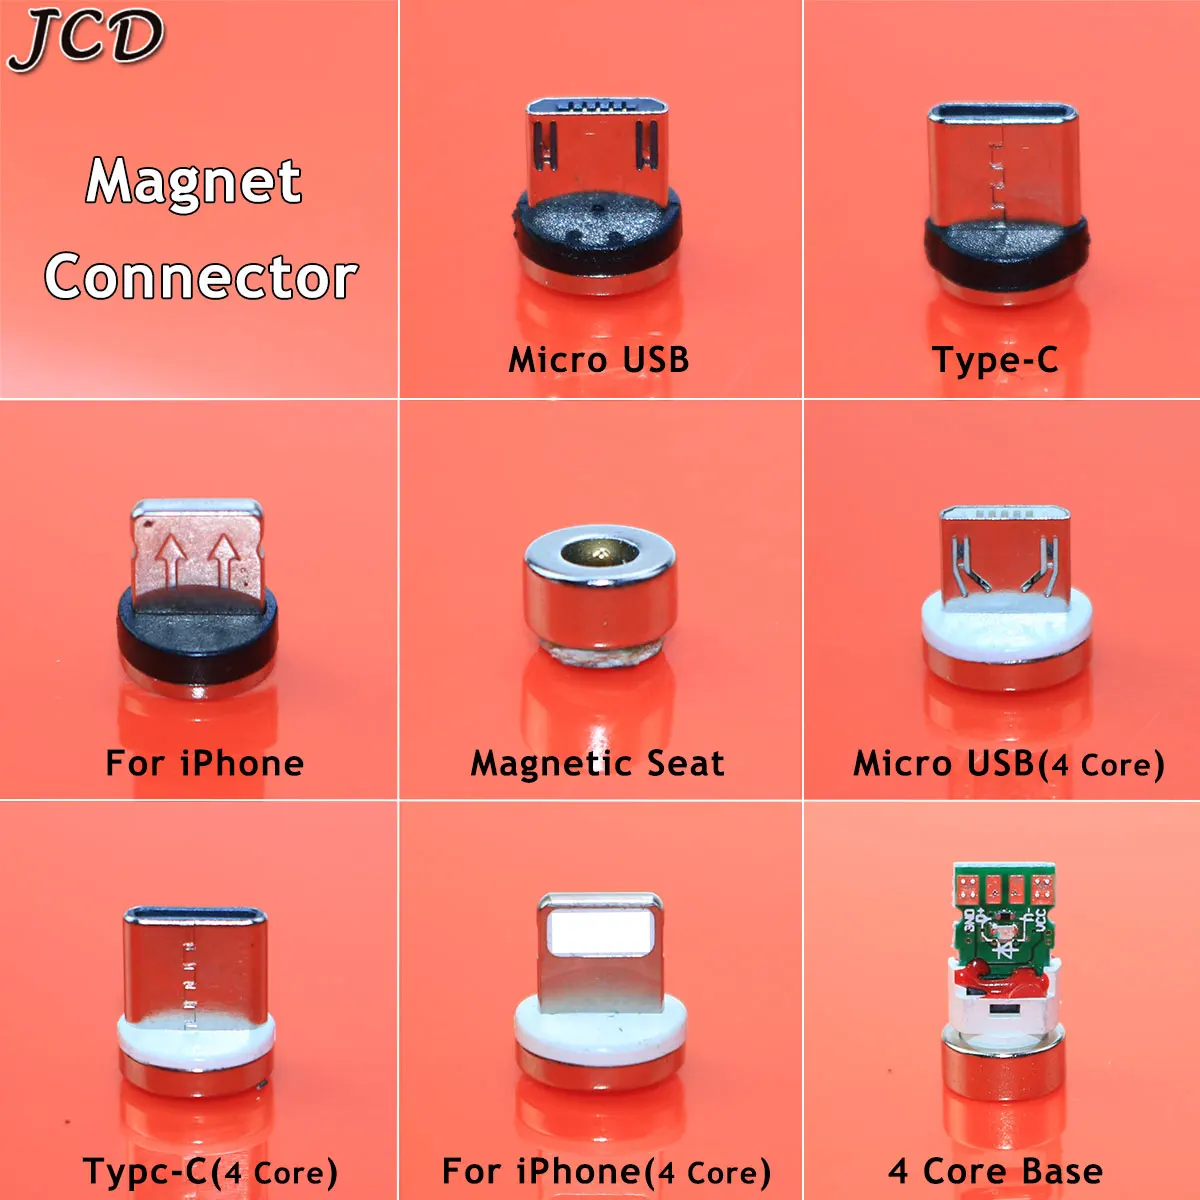 

JCD 1pcs Magnet Charger Connector For Iphone Huawei Samsung Magnetic Seat Cable Adapter Micro USB Type C Dustproof Magnetic Tips